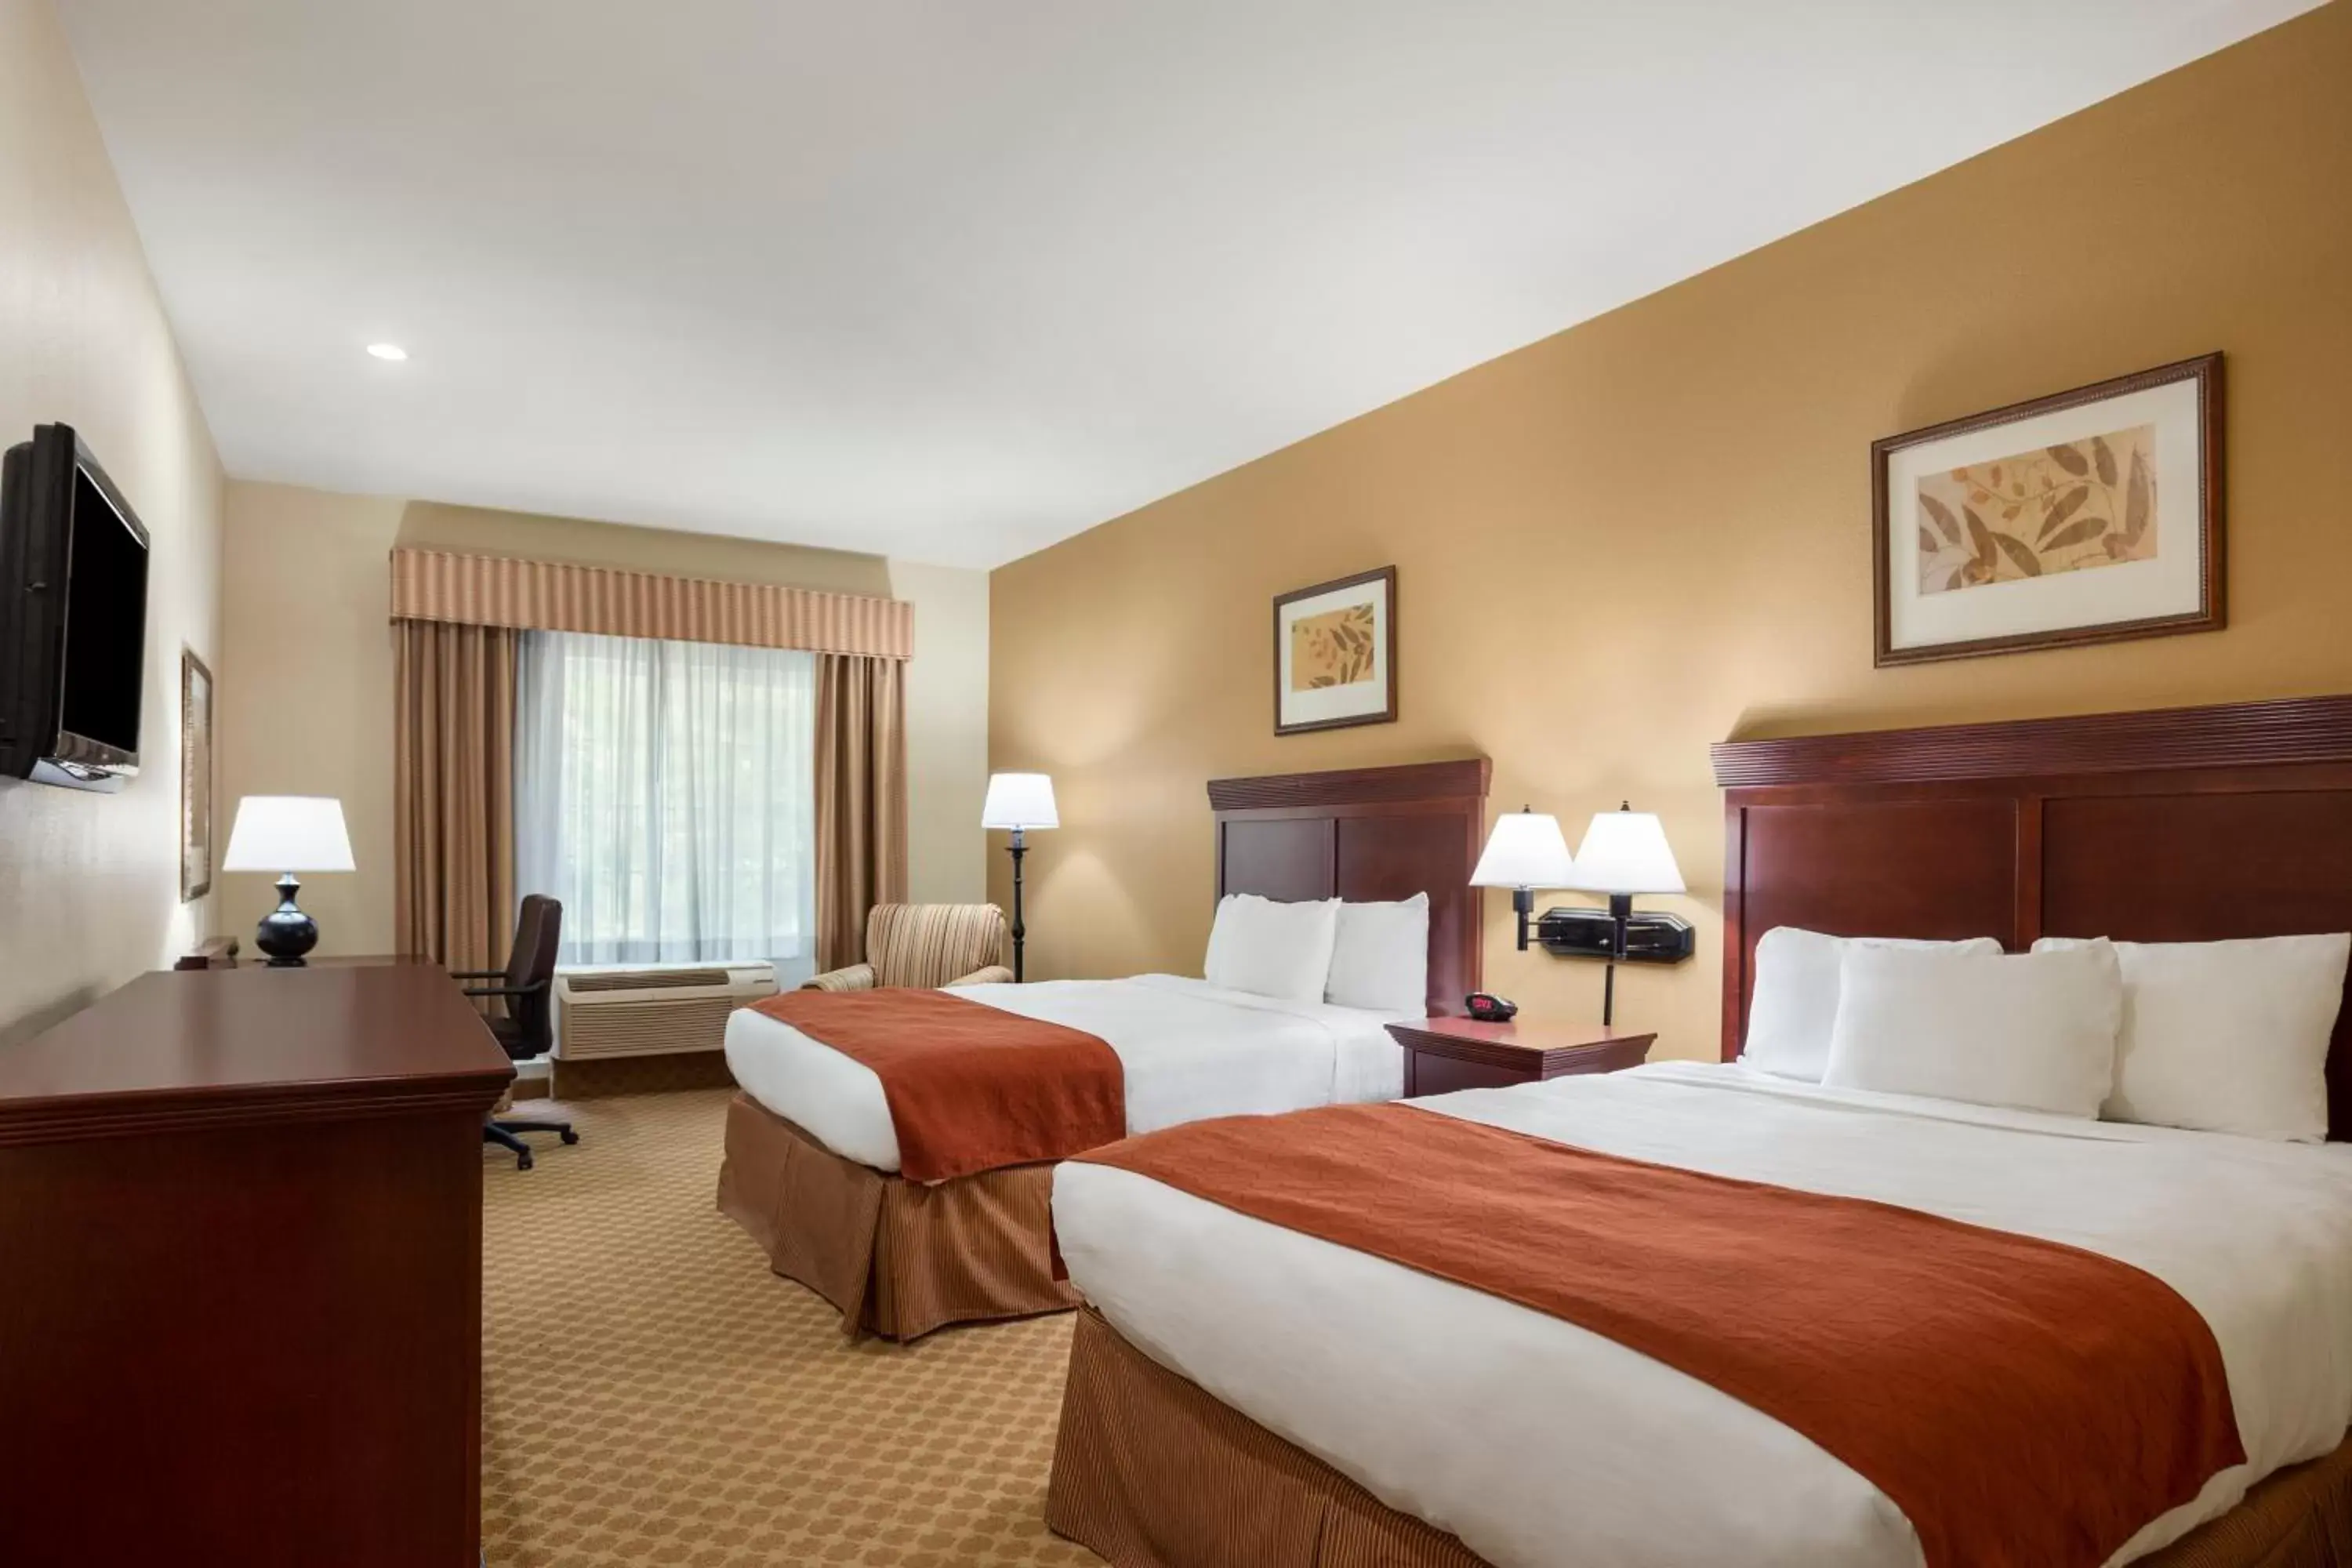 Bedroom in Country Inn & Suites by Radisson, Goodlettsville, TN